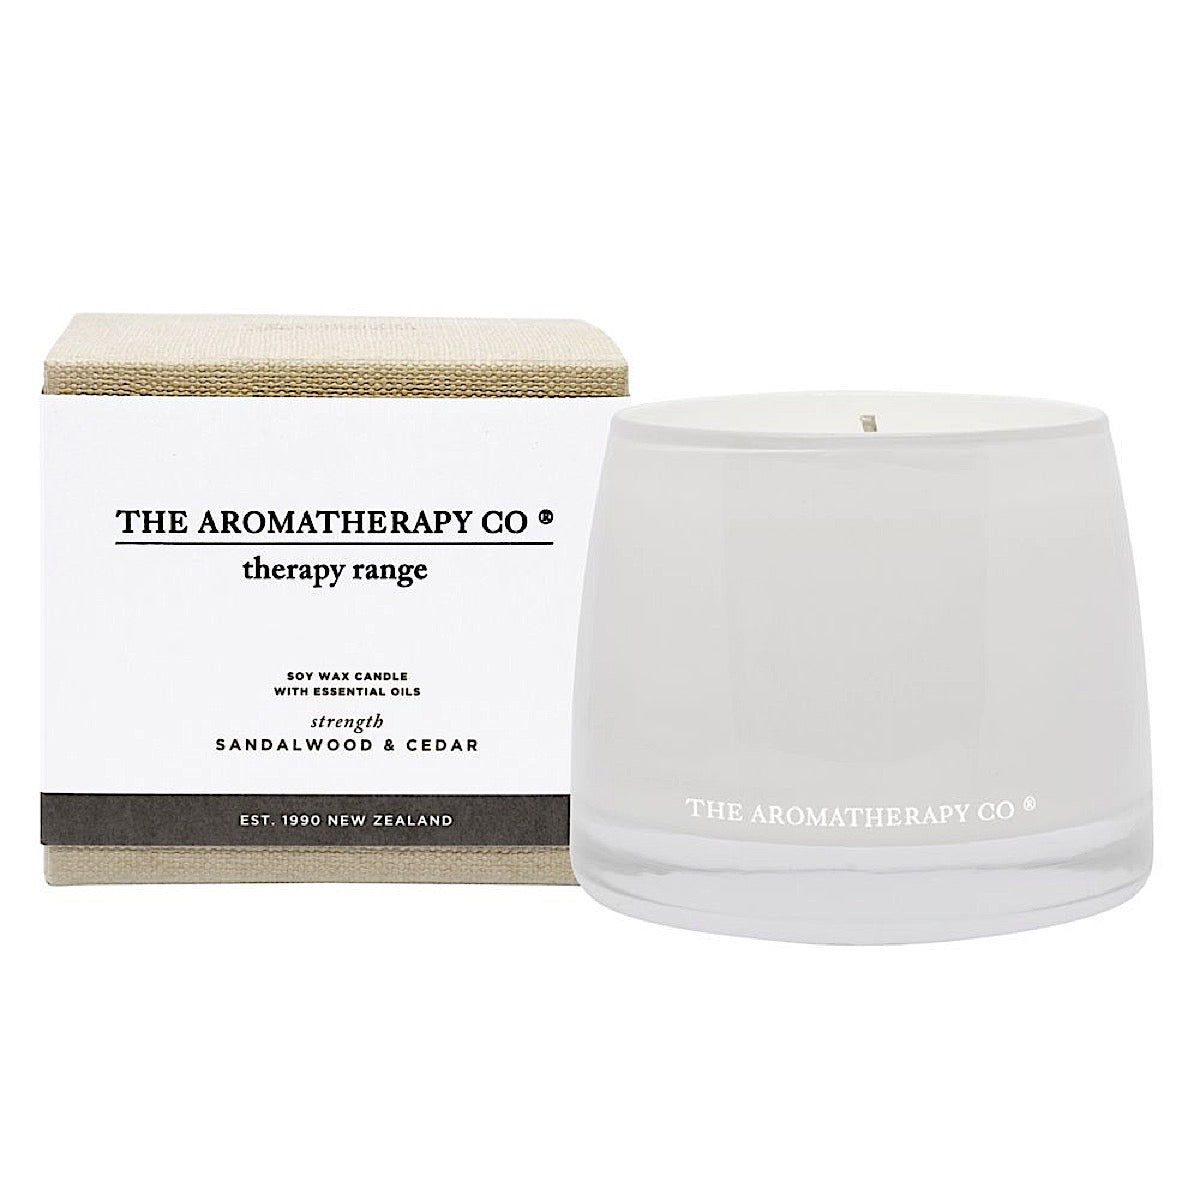 The Aromatherapy Co Therapy Range Strength Sandalwood & Cedar Candle at More Than Just A Gift